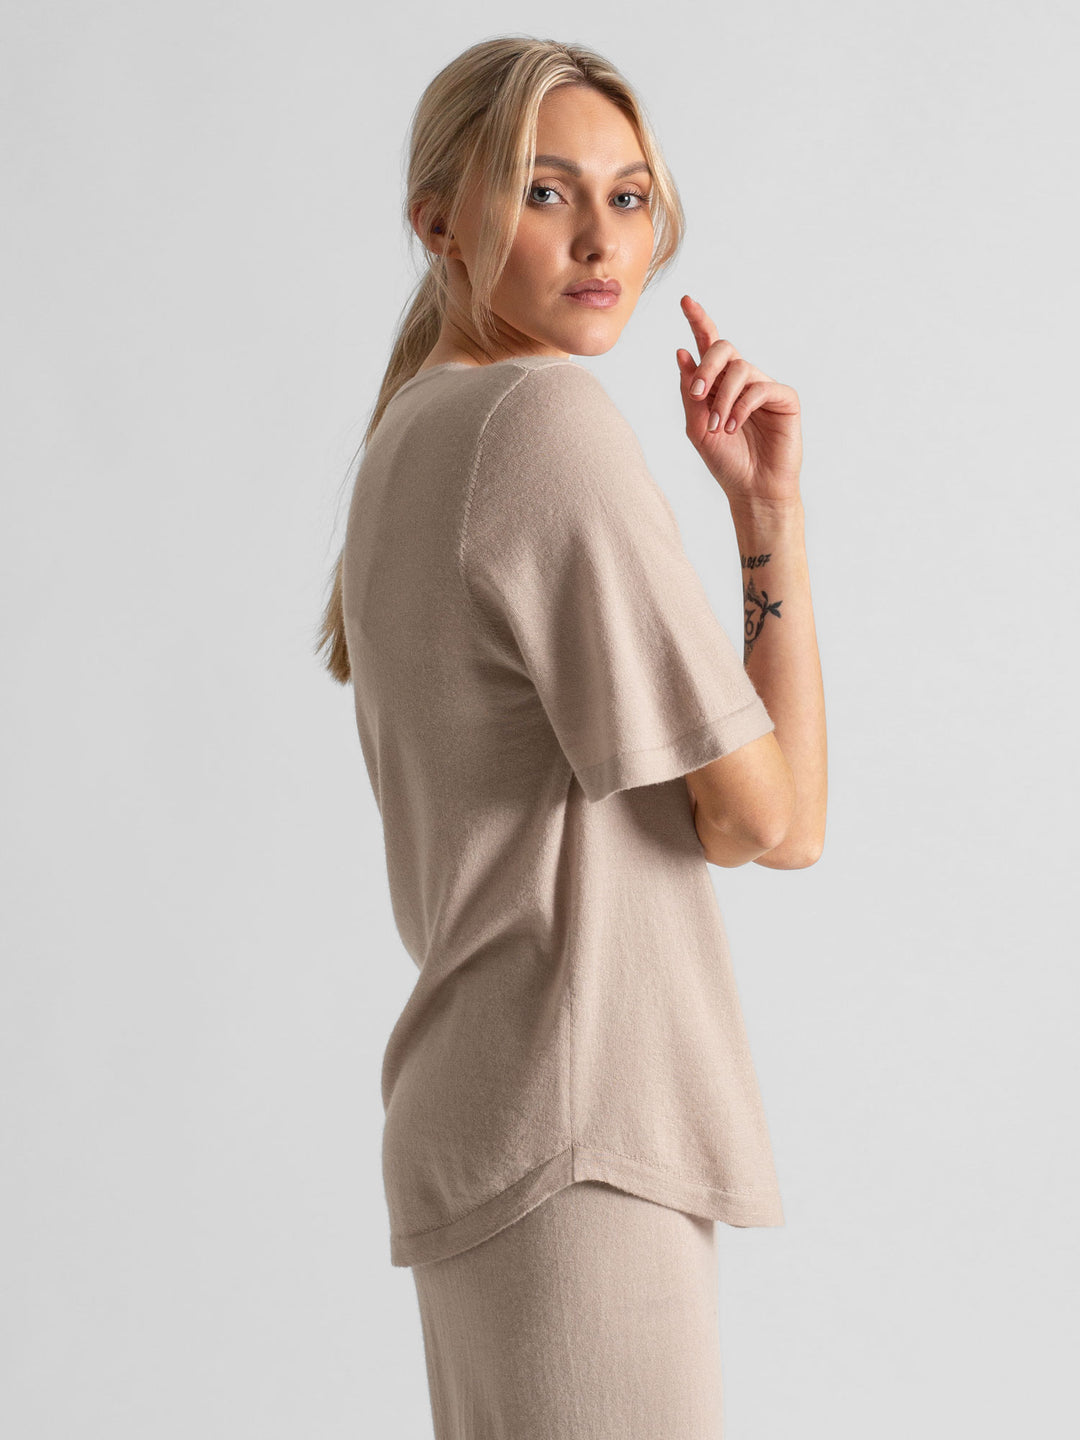 Cashmere t-shirt "Airy" in 100% pure cashmere. Color: Feather. Scandinavian design by Kashmina. 